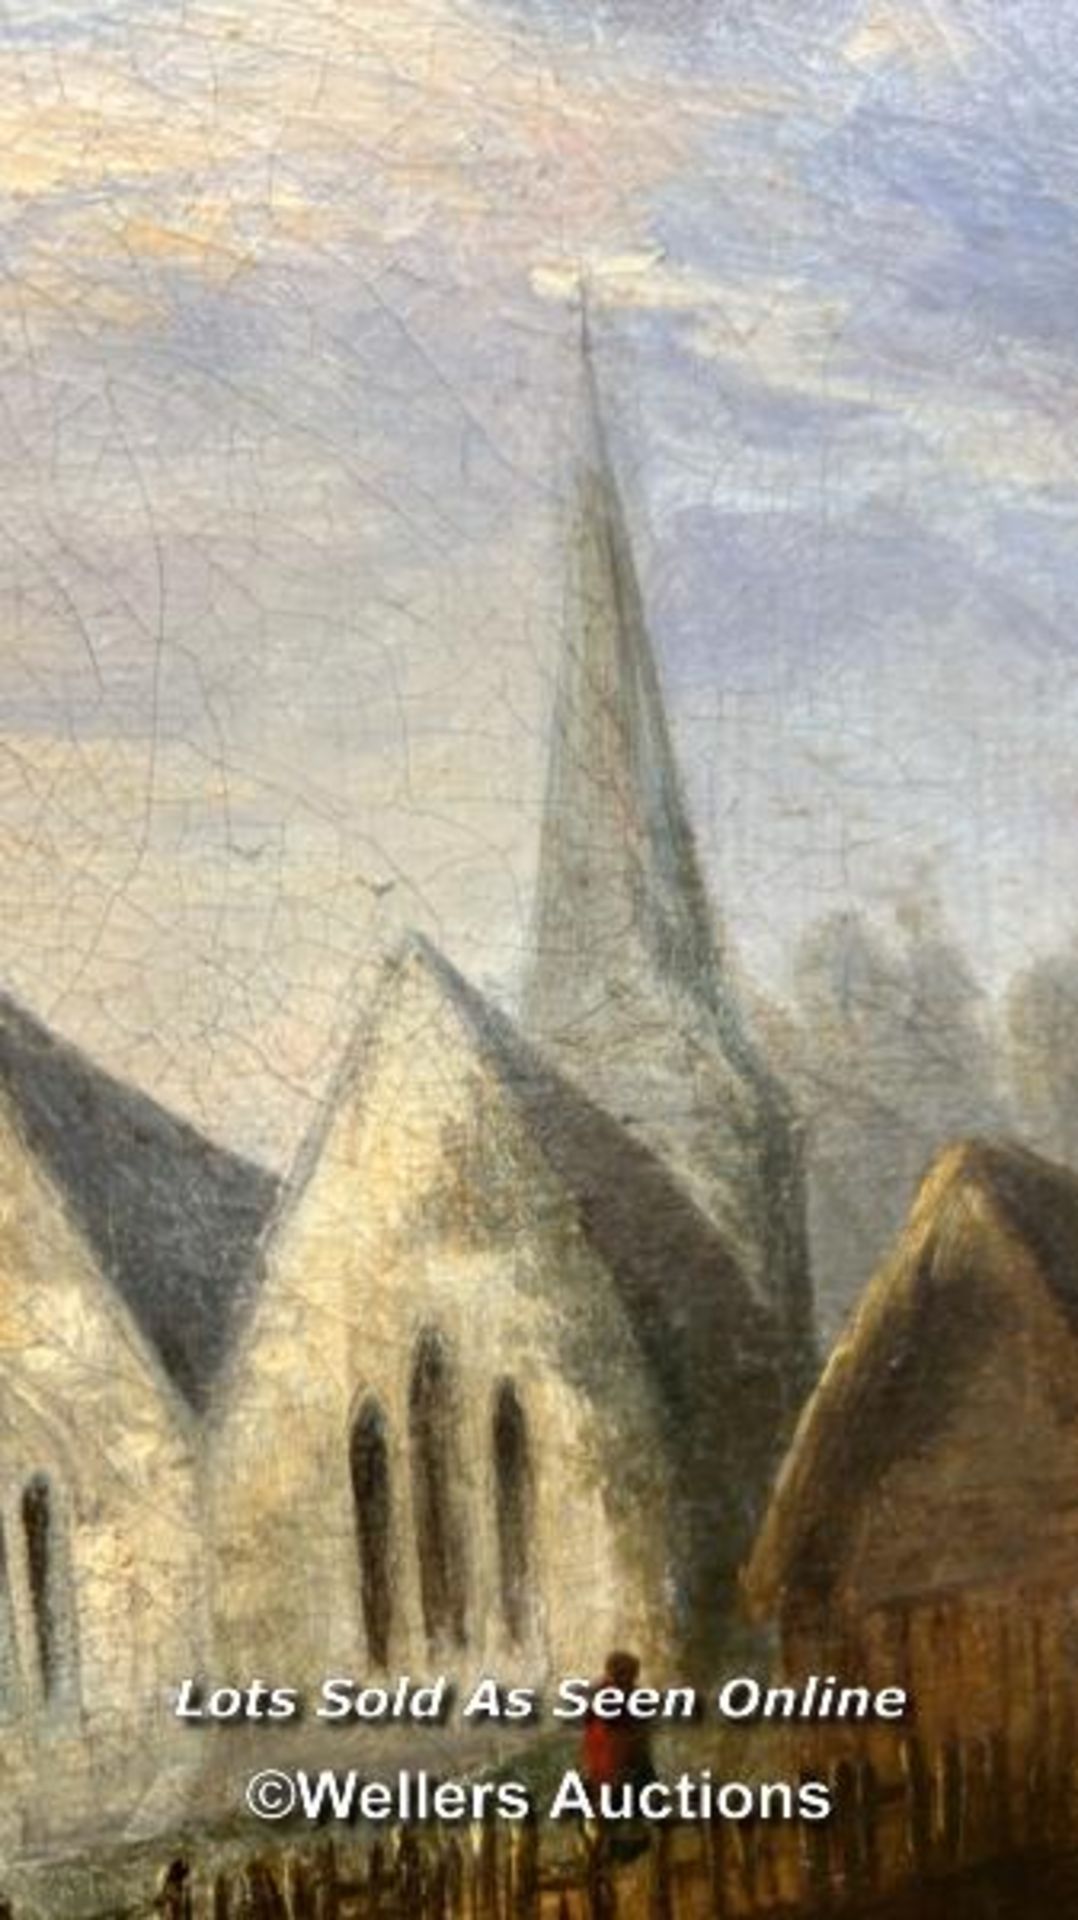 OIL ON CANVAS DEPICTING A CHURCH SCENE - Image 4 of 4